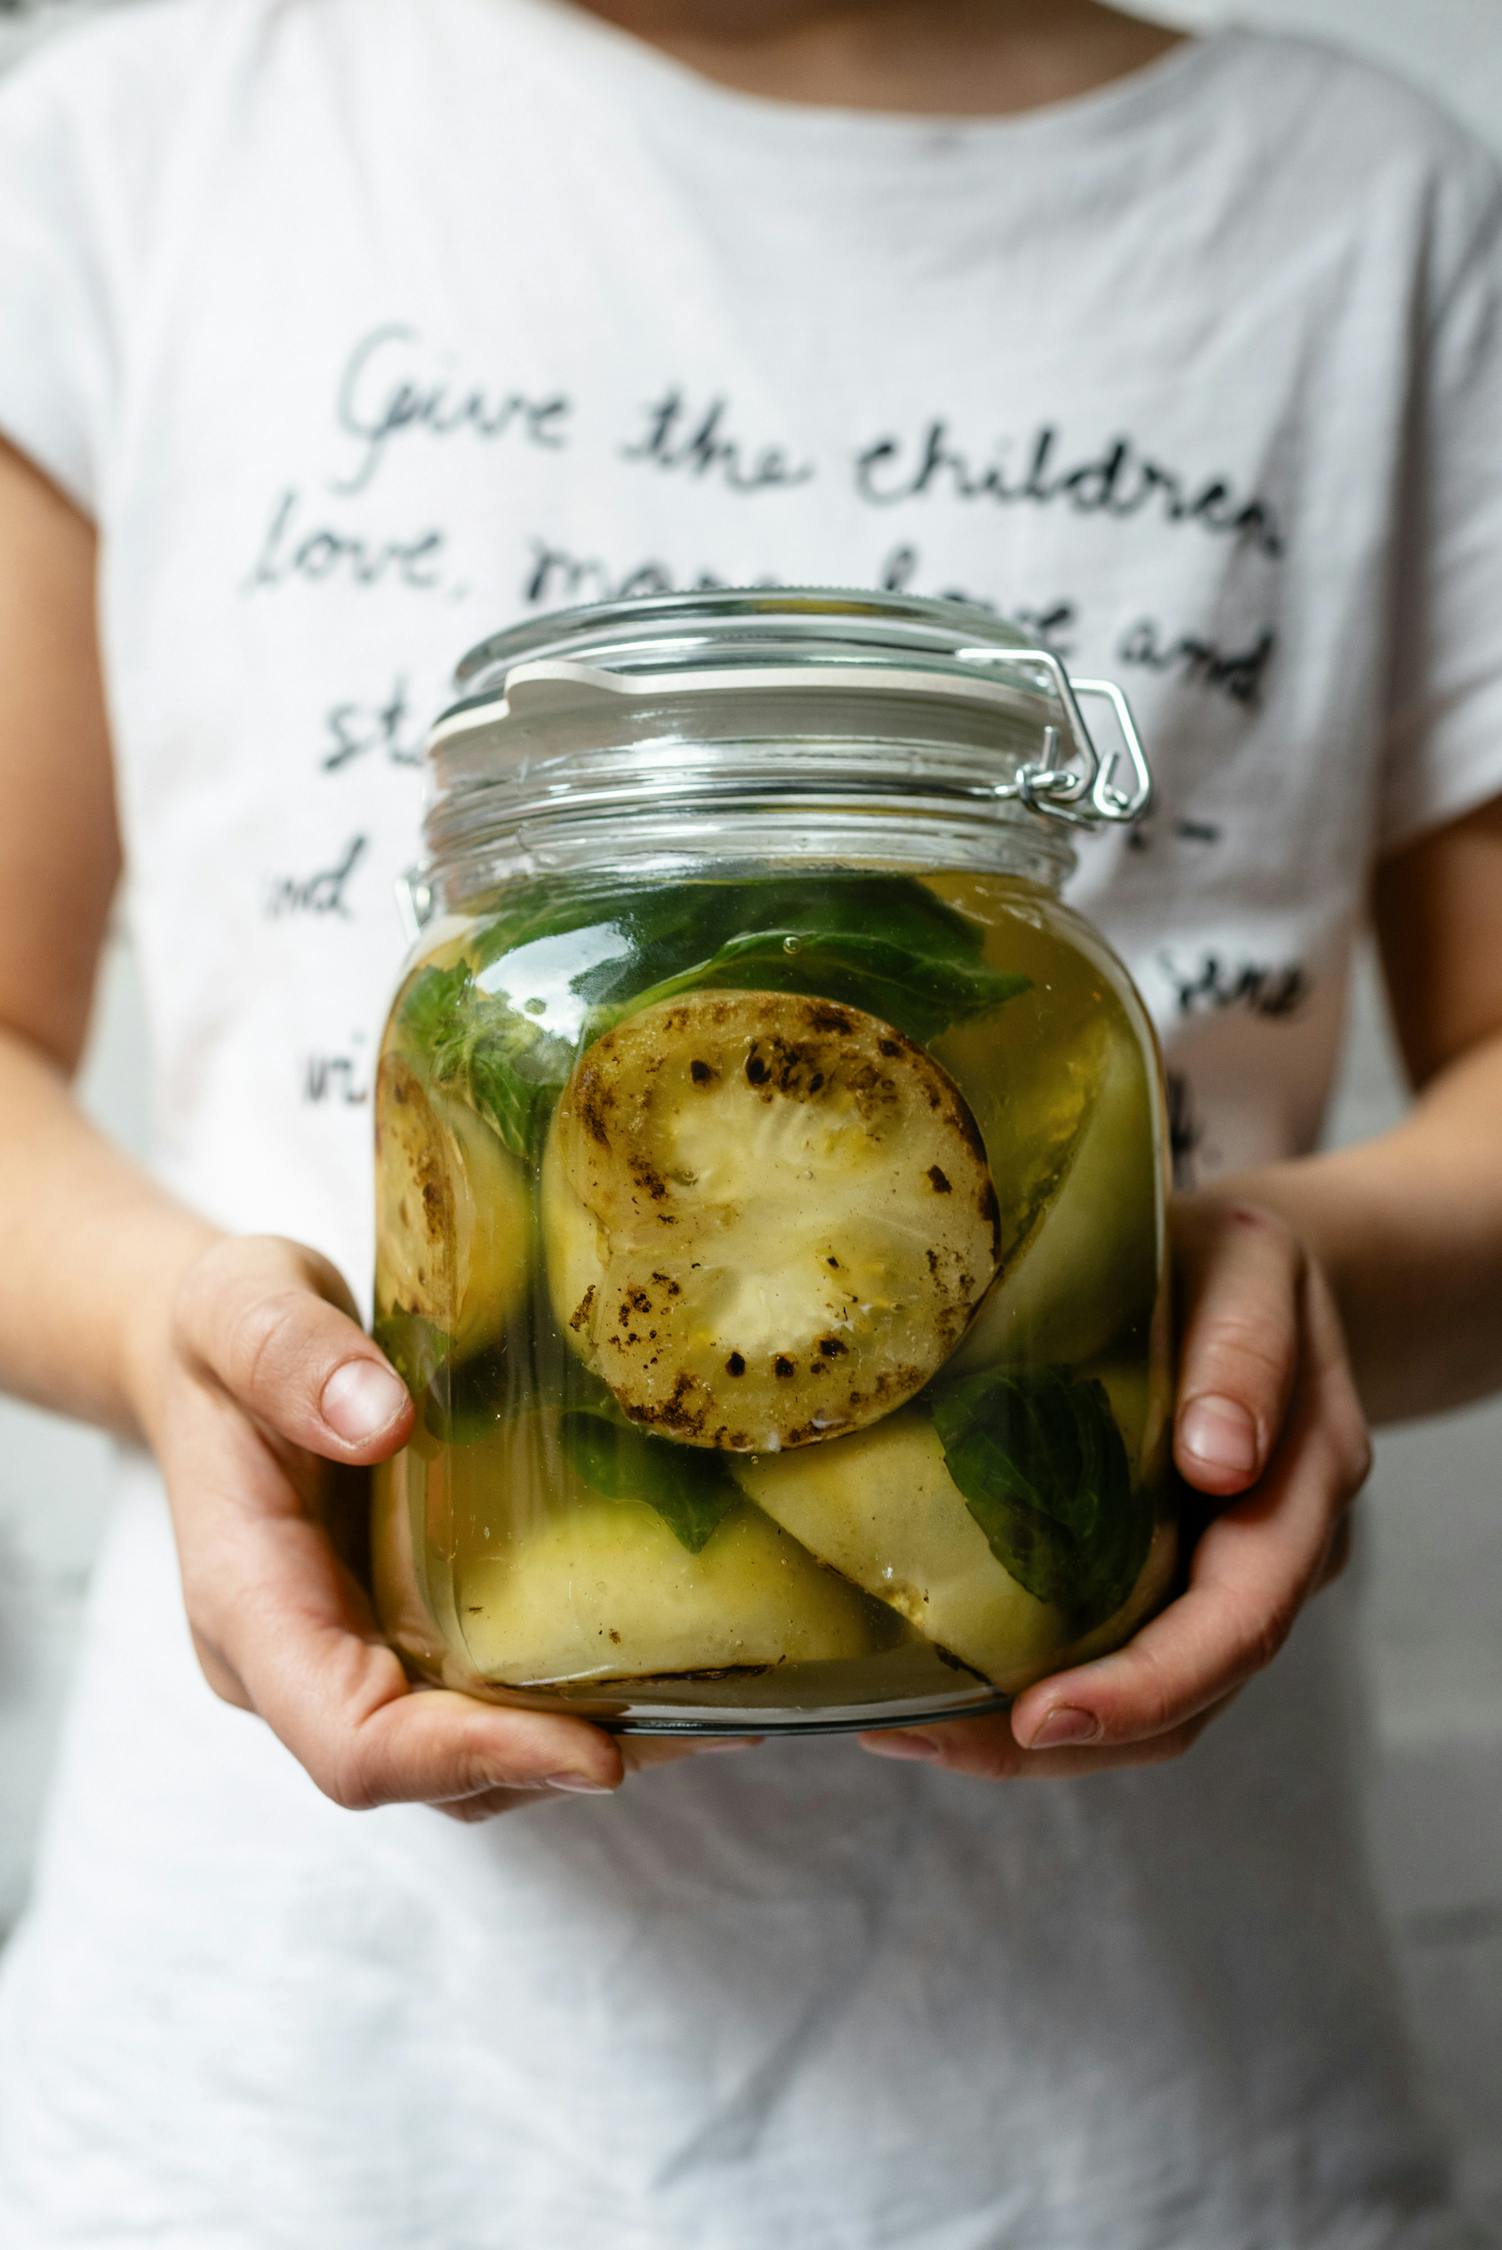 Crop unrecognizable person with jar of pickled zucchini